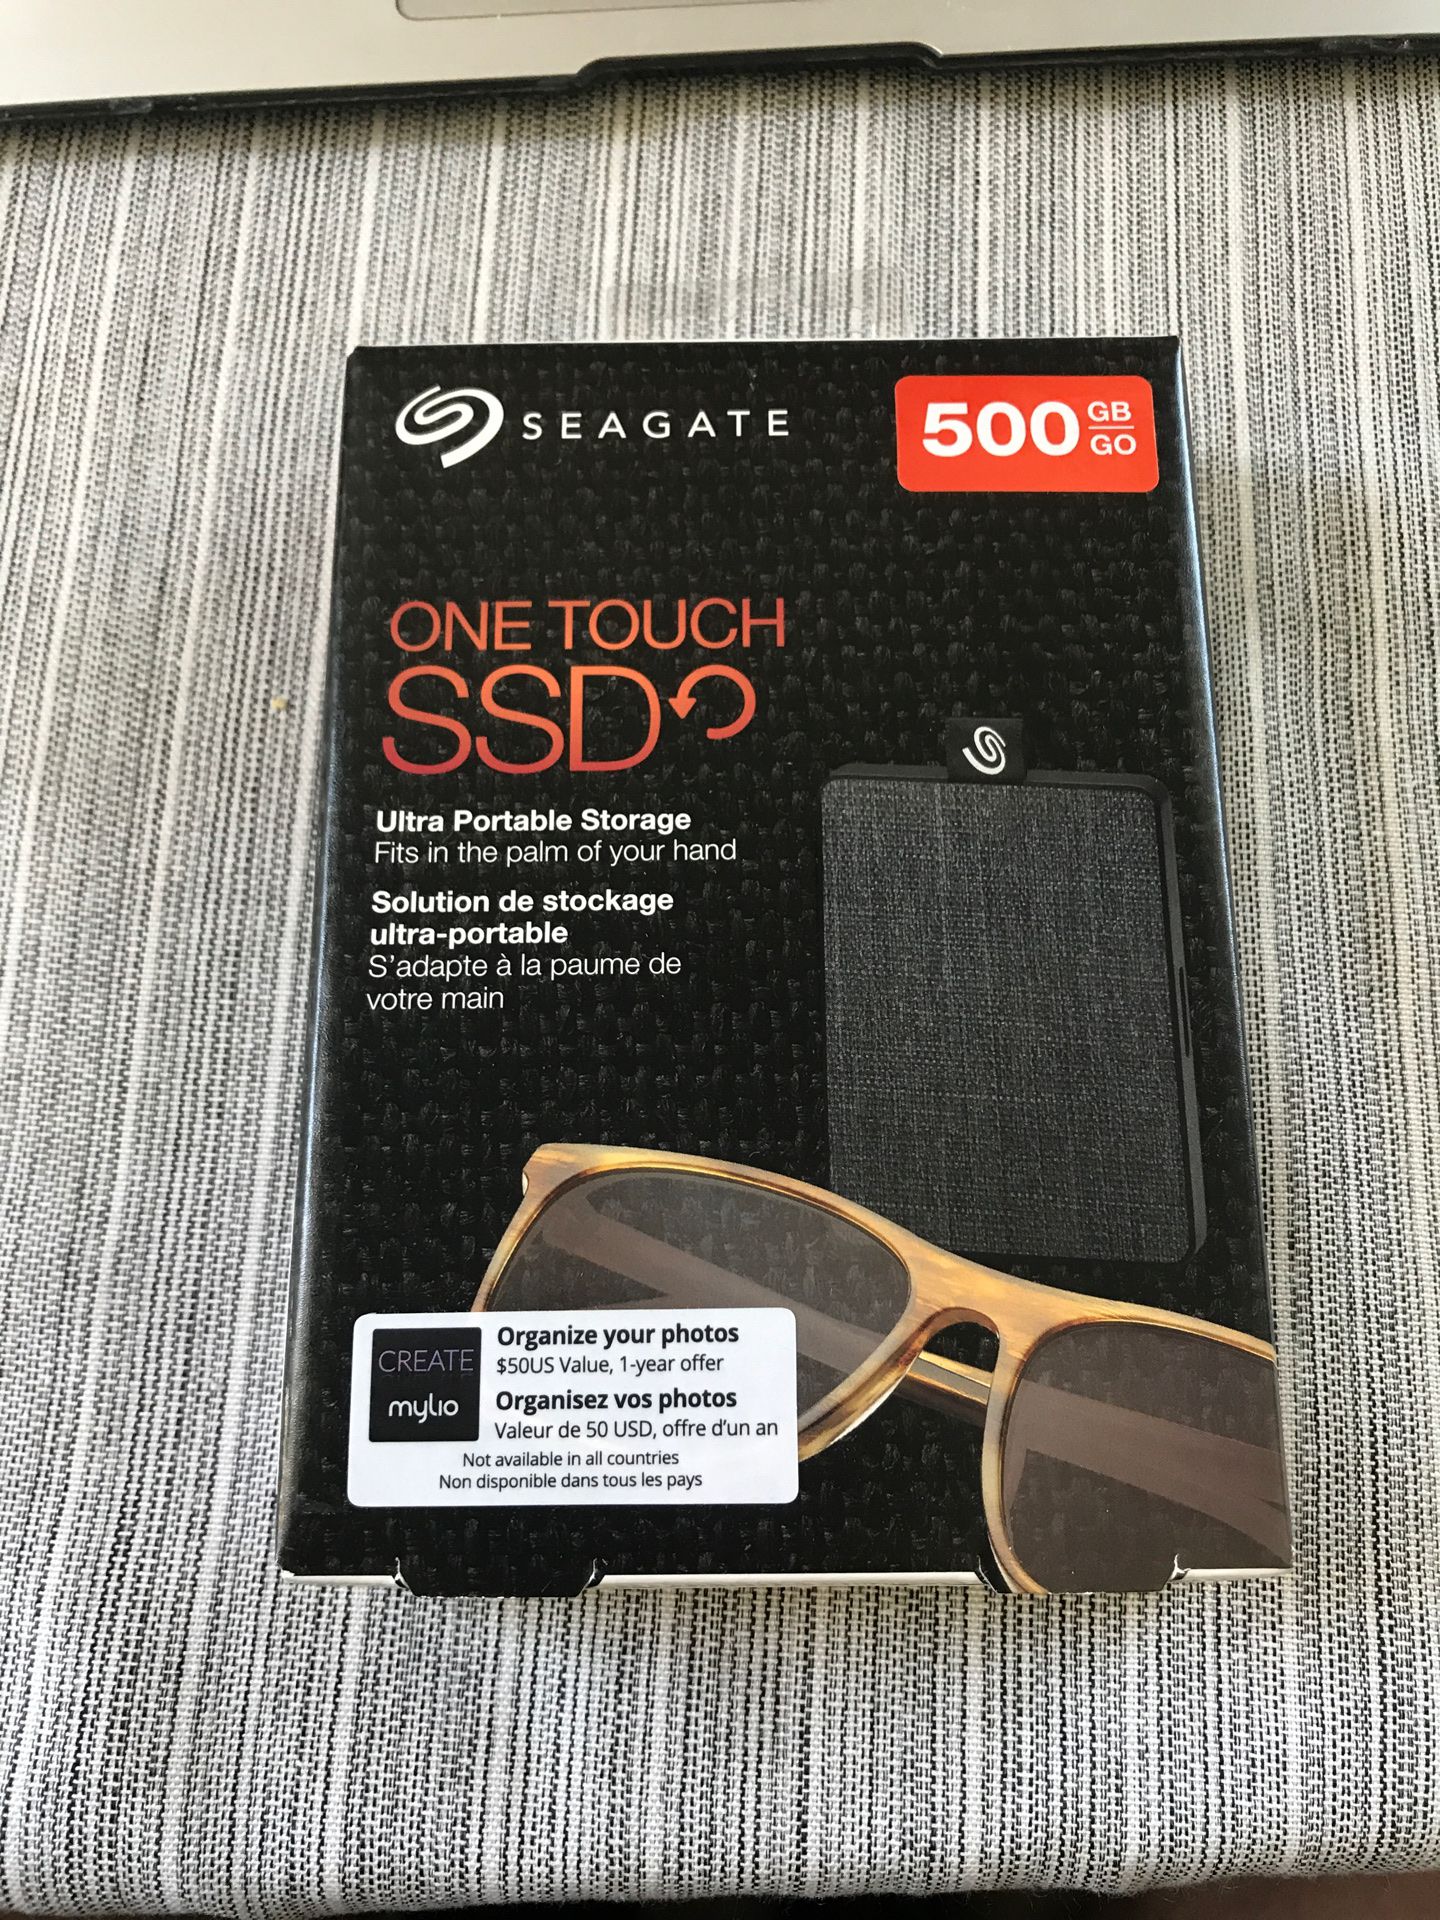 Seagate Onetouch SSD 500gb